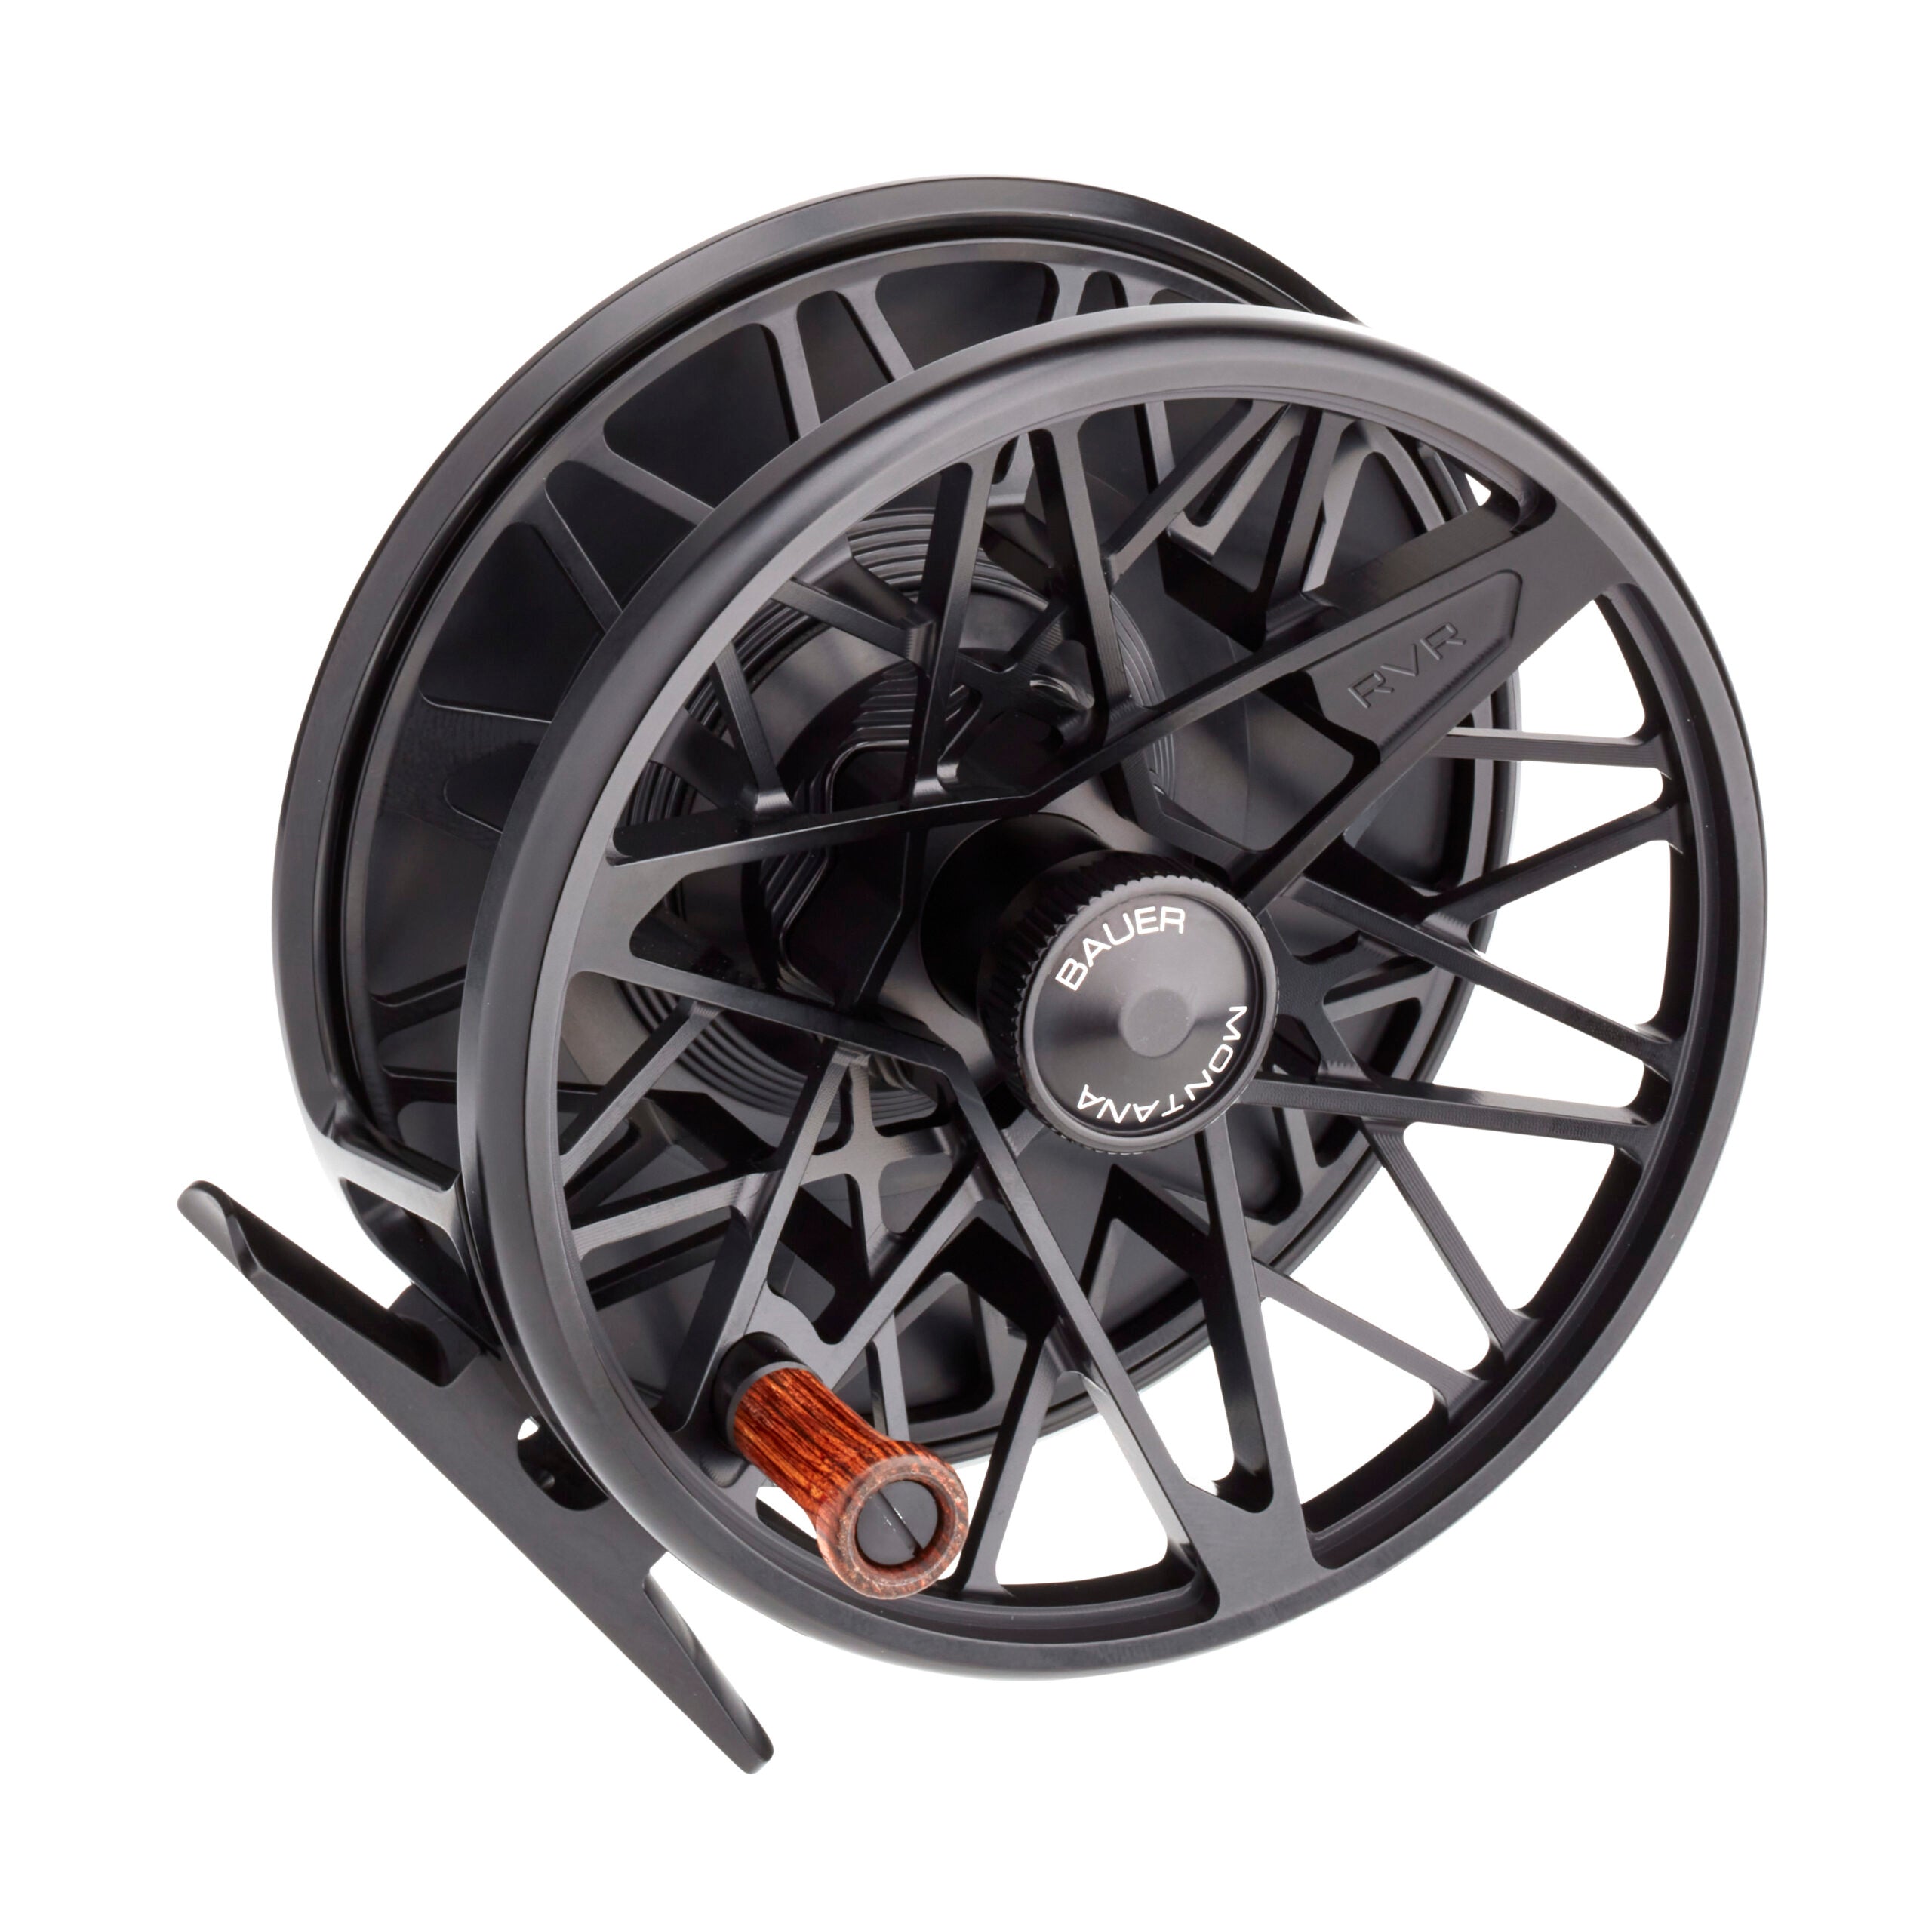 Bauer RX 1 Fly Reel - Black / Charcoal - NEW - FREE FLY LINE 